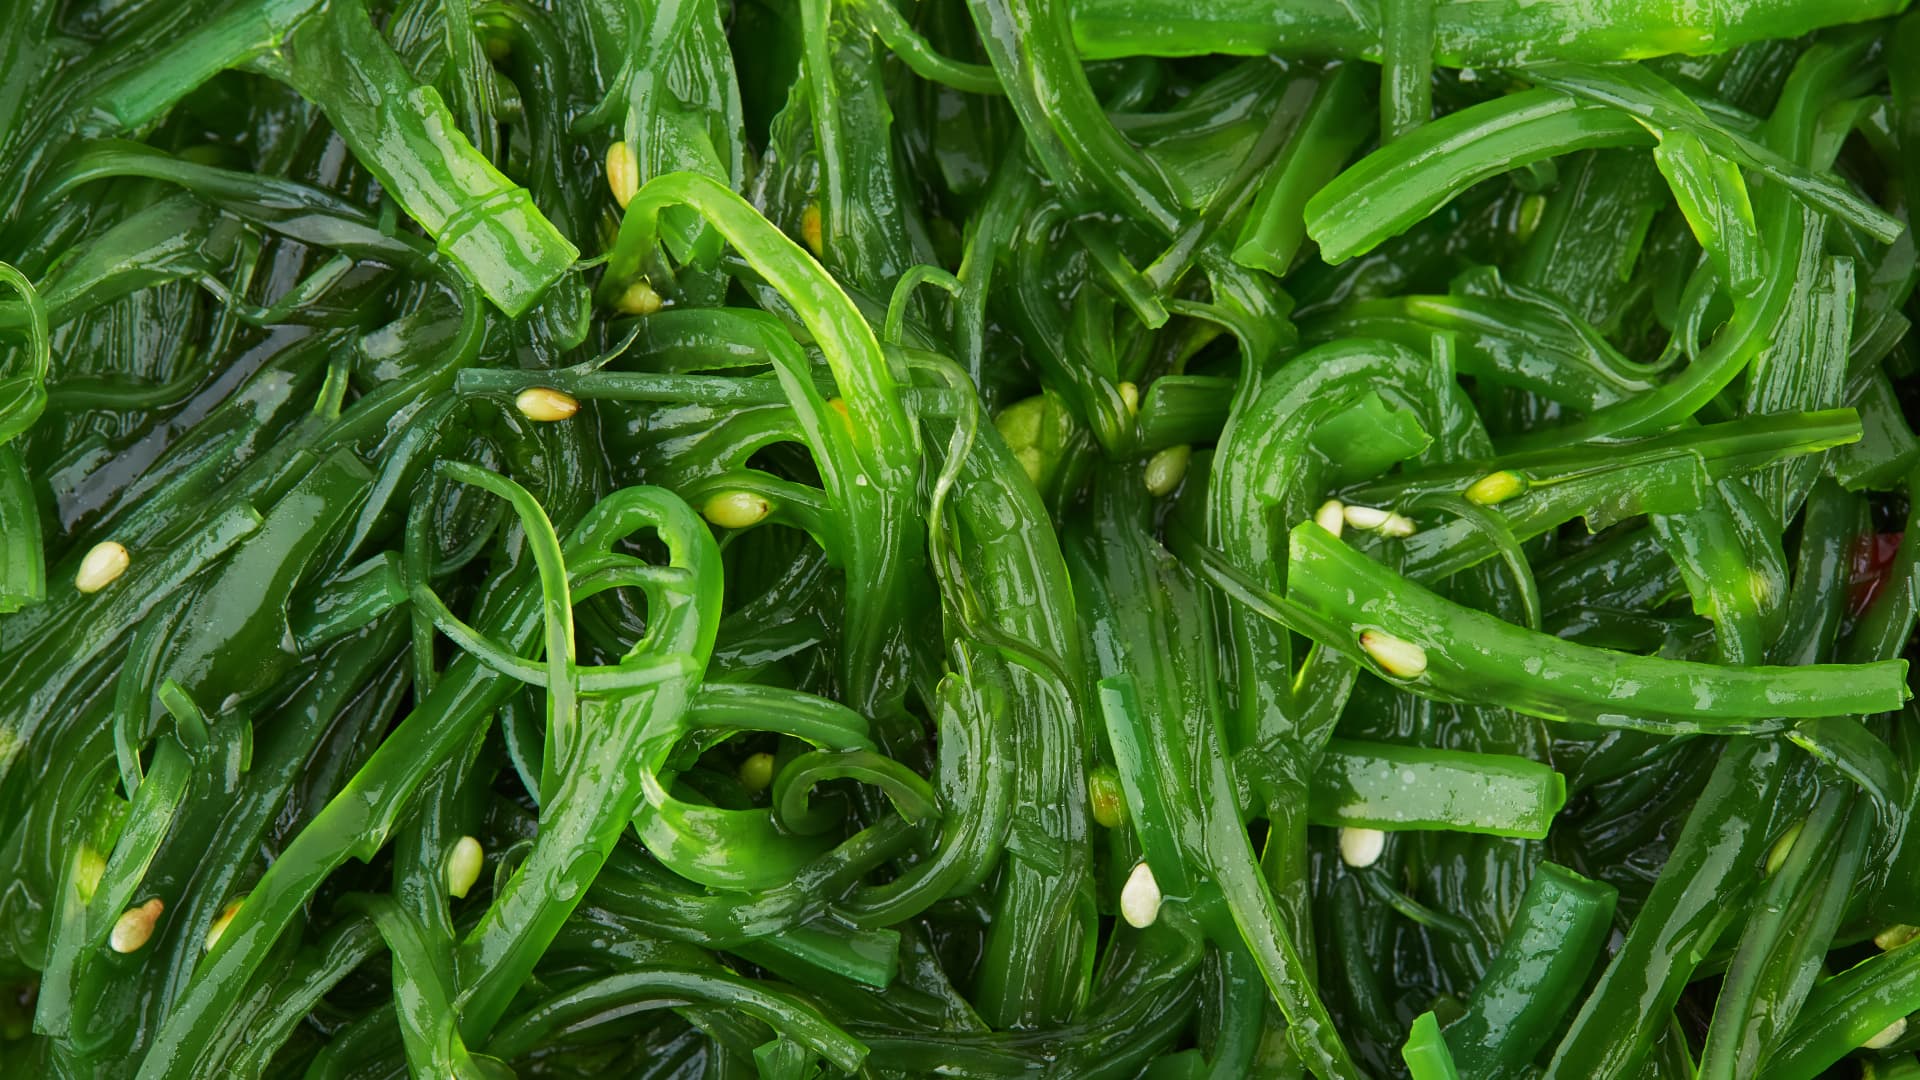 In the fight against climate change, seaweed could be a surprising — but vital — weapon